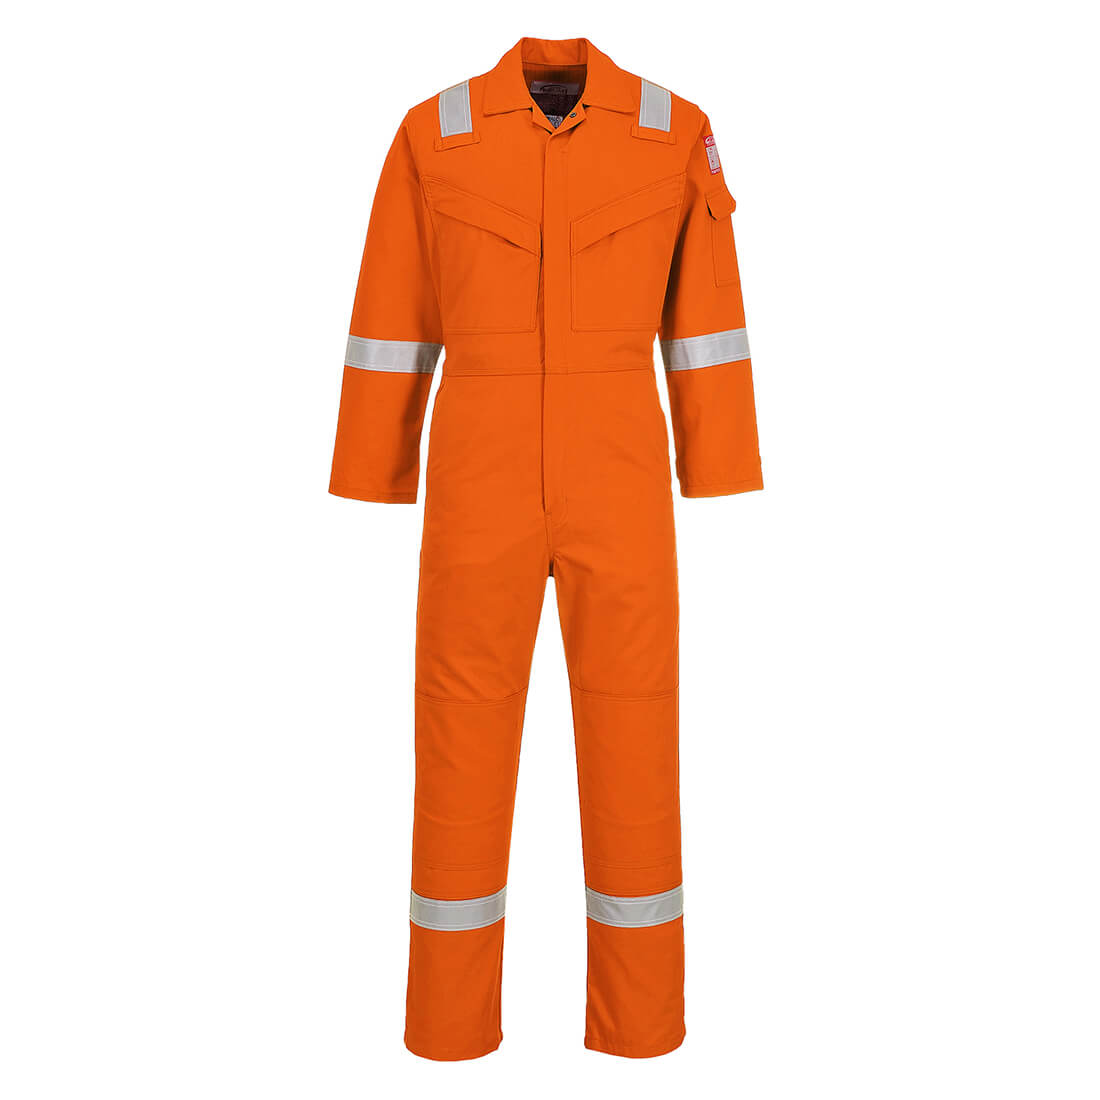 Image of Biz Flame Mens Aberdeen Flame Resistant Antistatic Coverall Orange S 32"